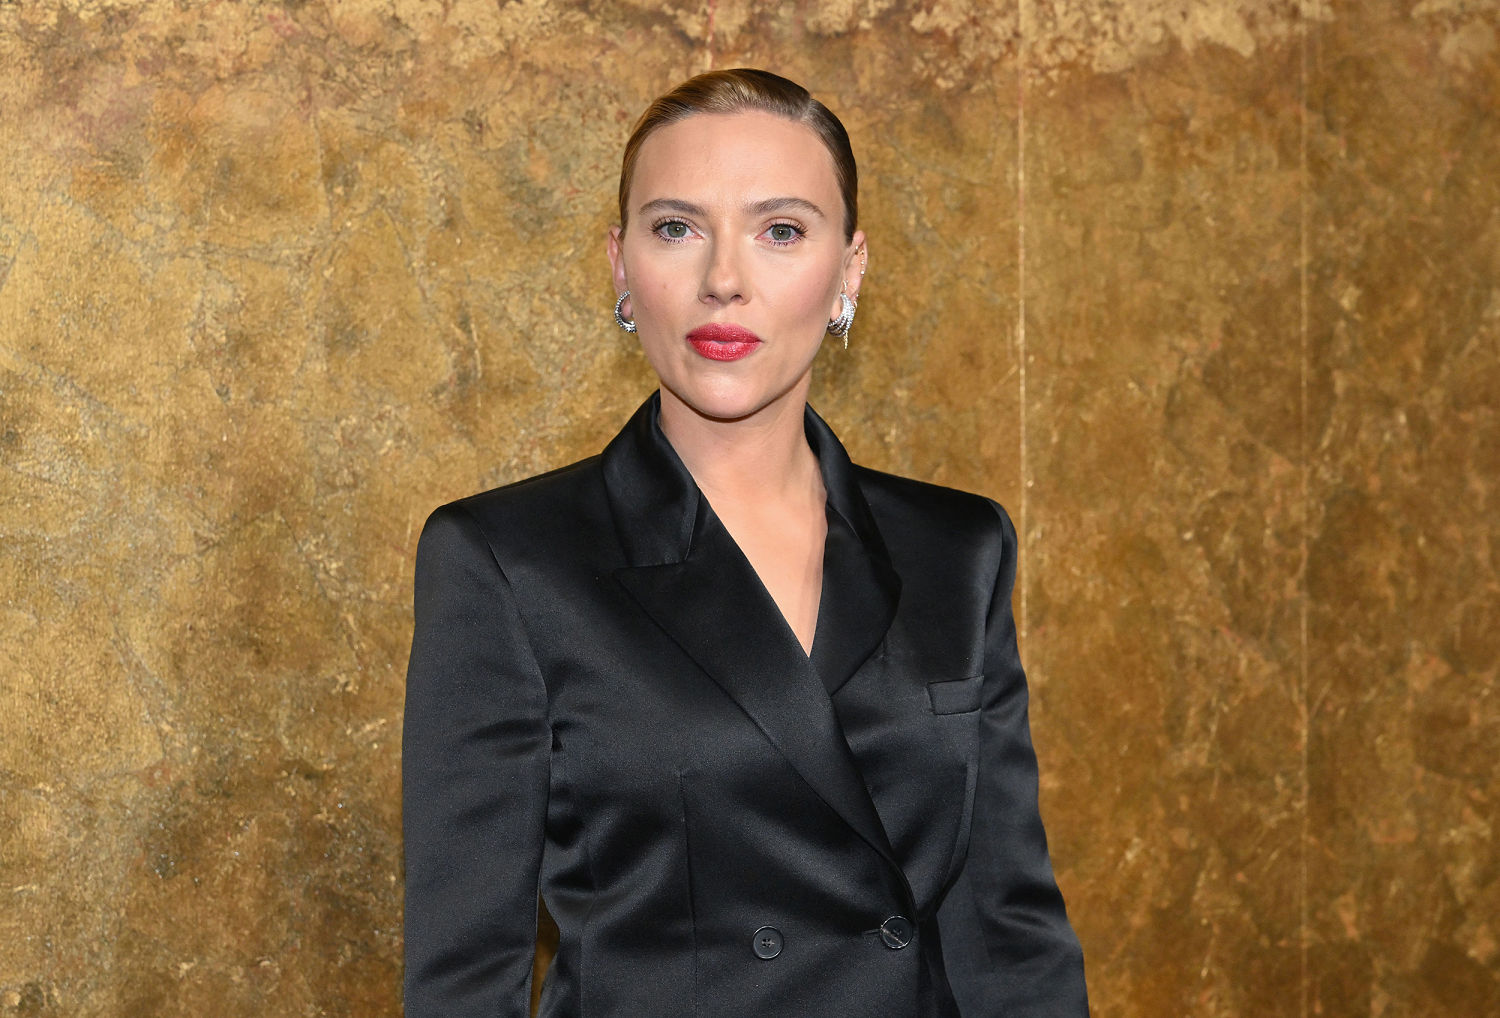 Scarlett Johansson says she was 'shocked, angered' by ChatGPT voice that sounded like her